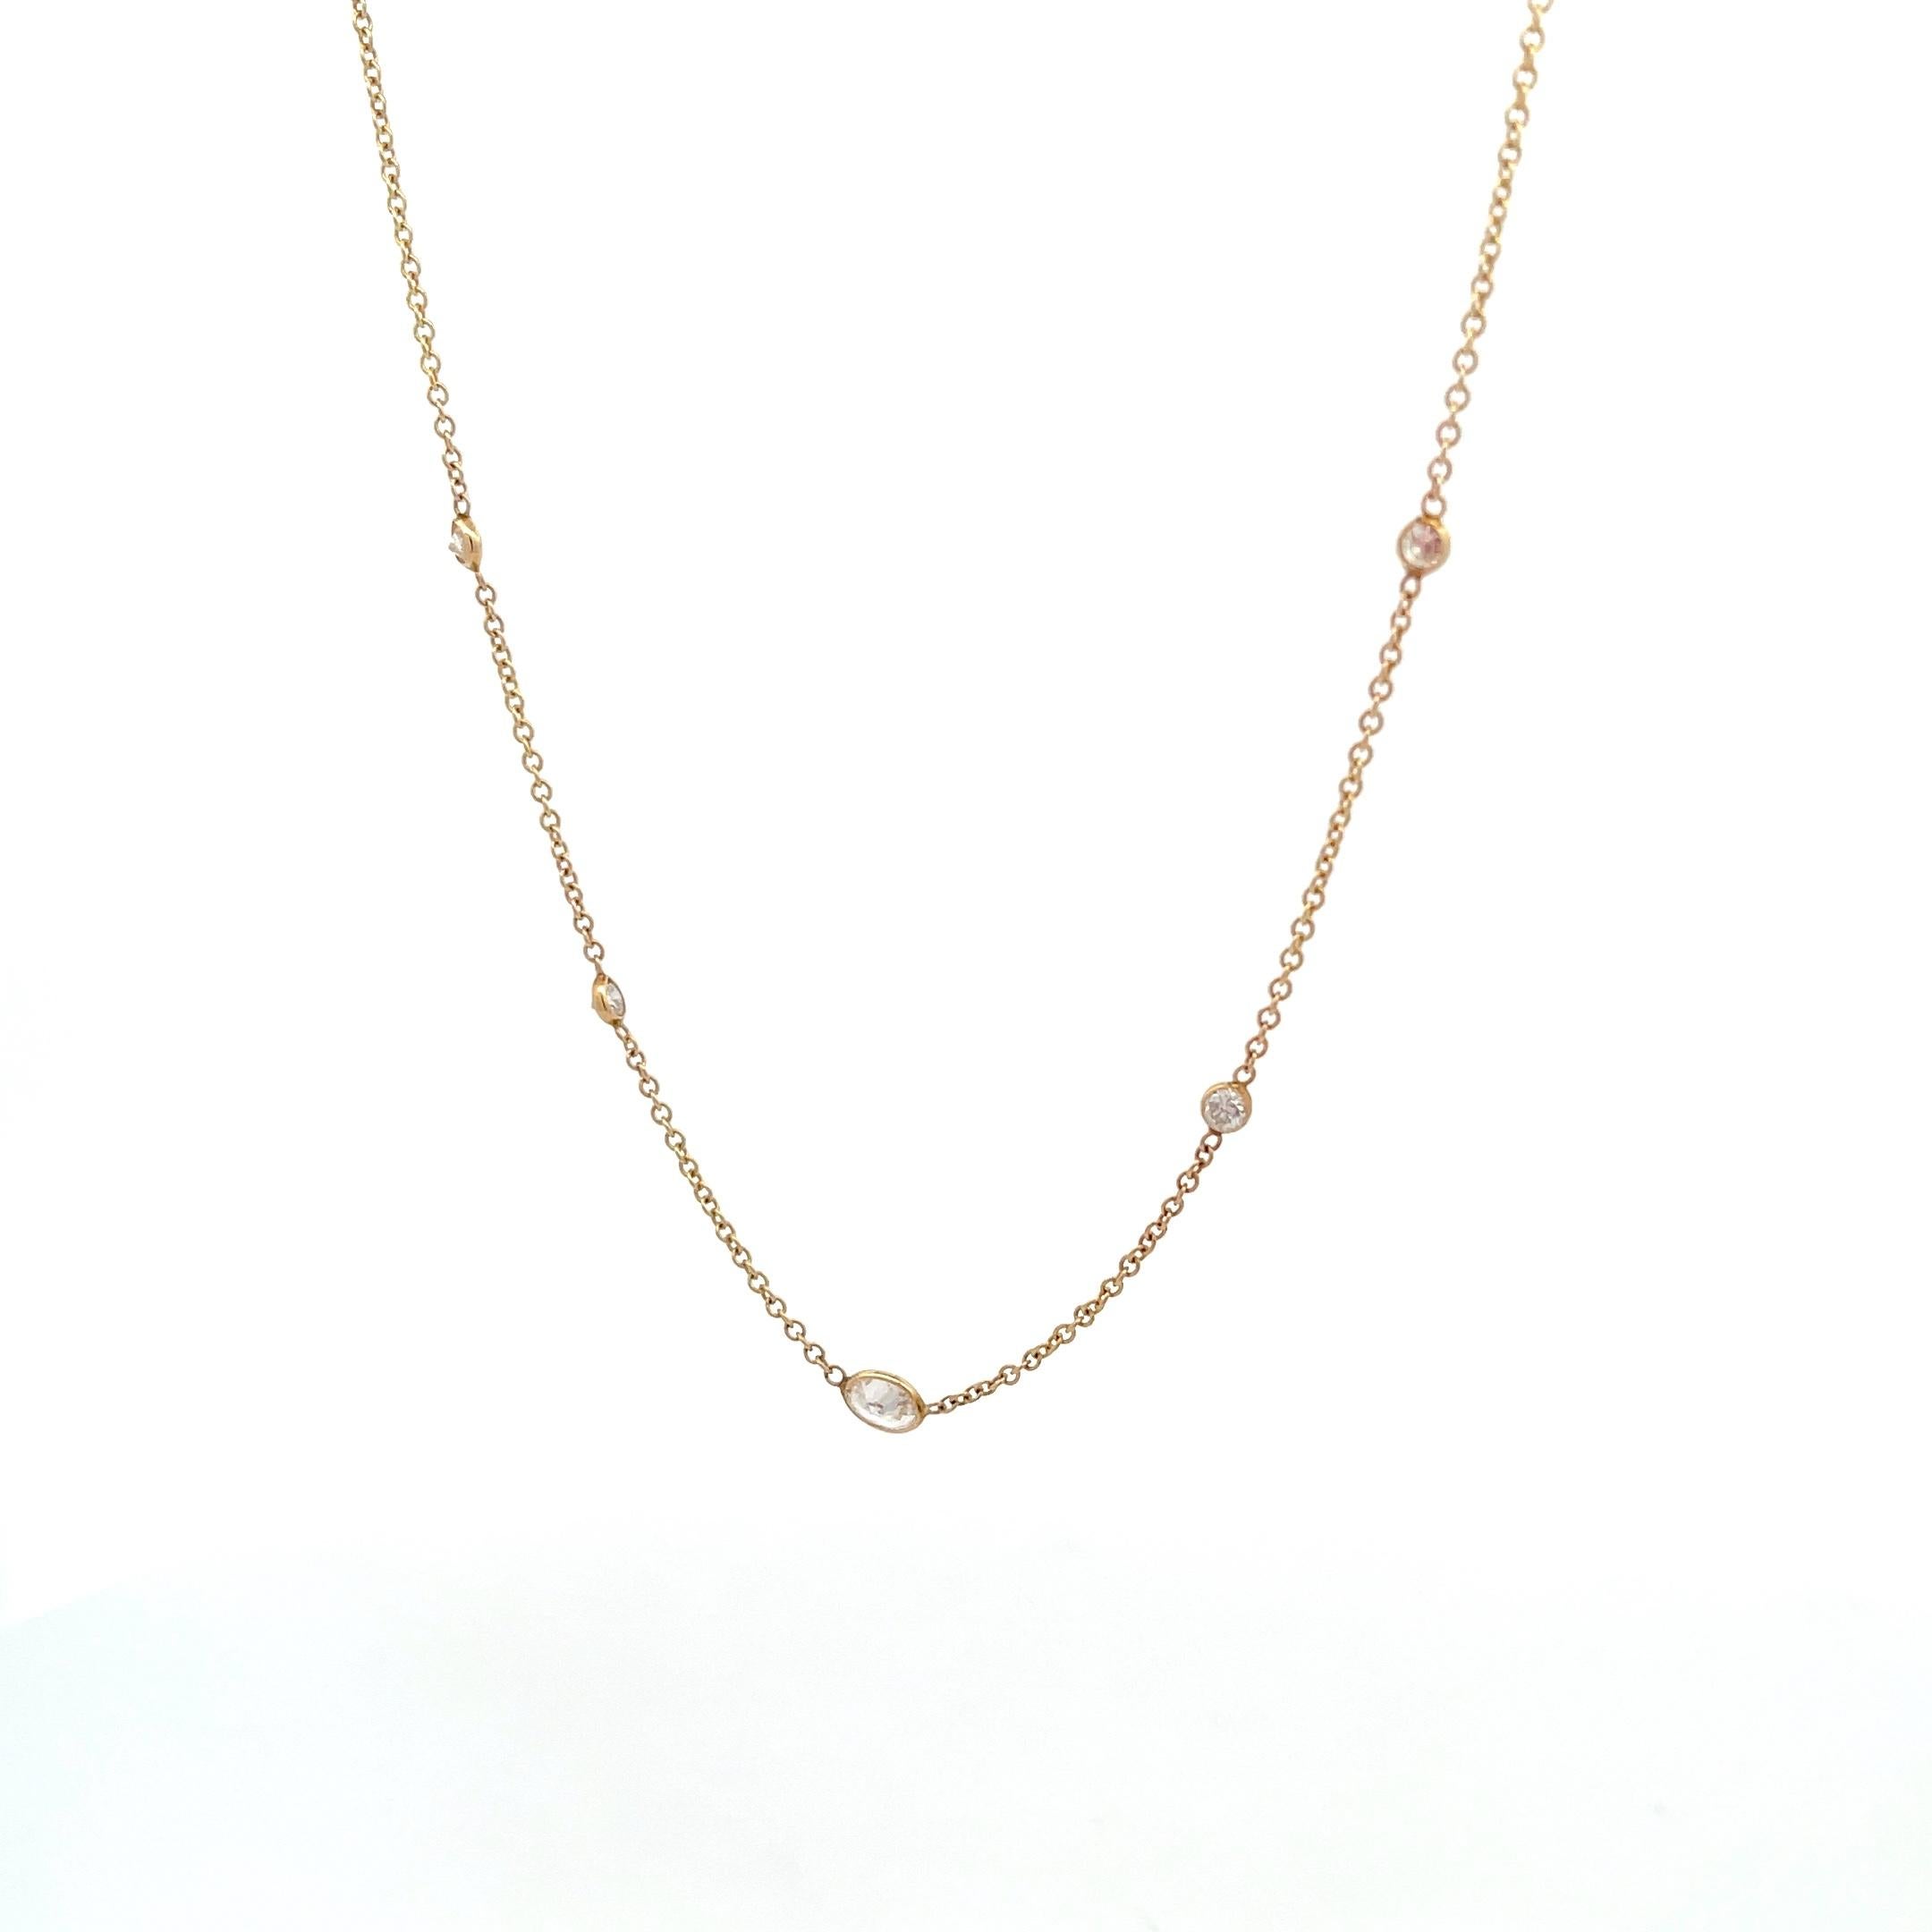 Introducing our exquisite 14K Yellow Gold 1/2ctw 5 station Diamonds-by-the-Yard Necklace with 0.25ctw Oval Center - a dazzling masterpiece to elevate your style. Crafted in 14K yellow gold, this necklace exudes elegance and charm. Adorned with